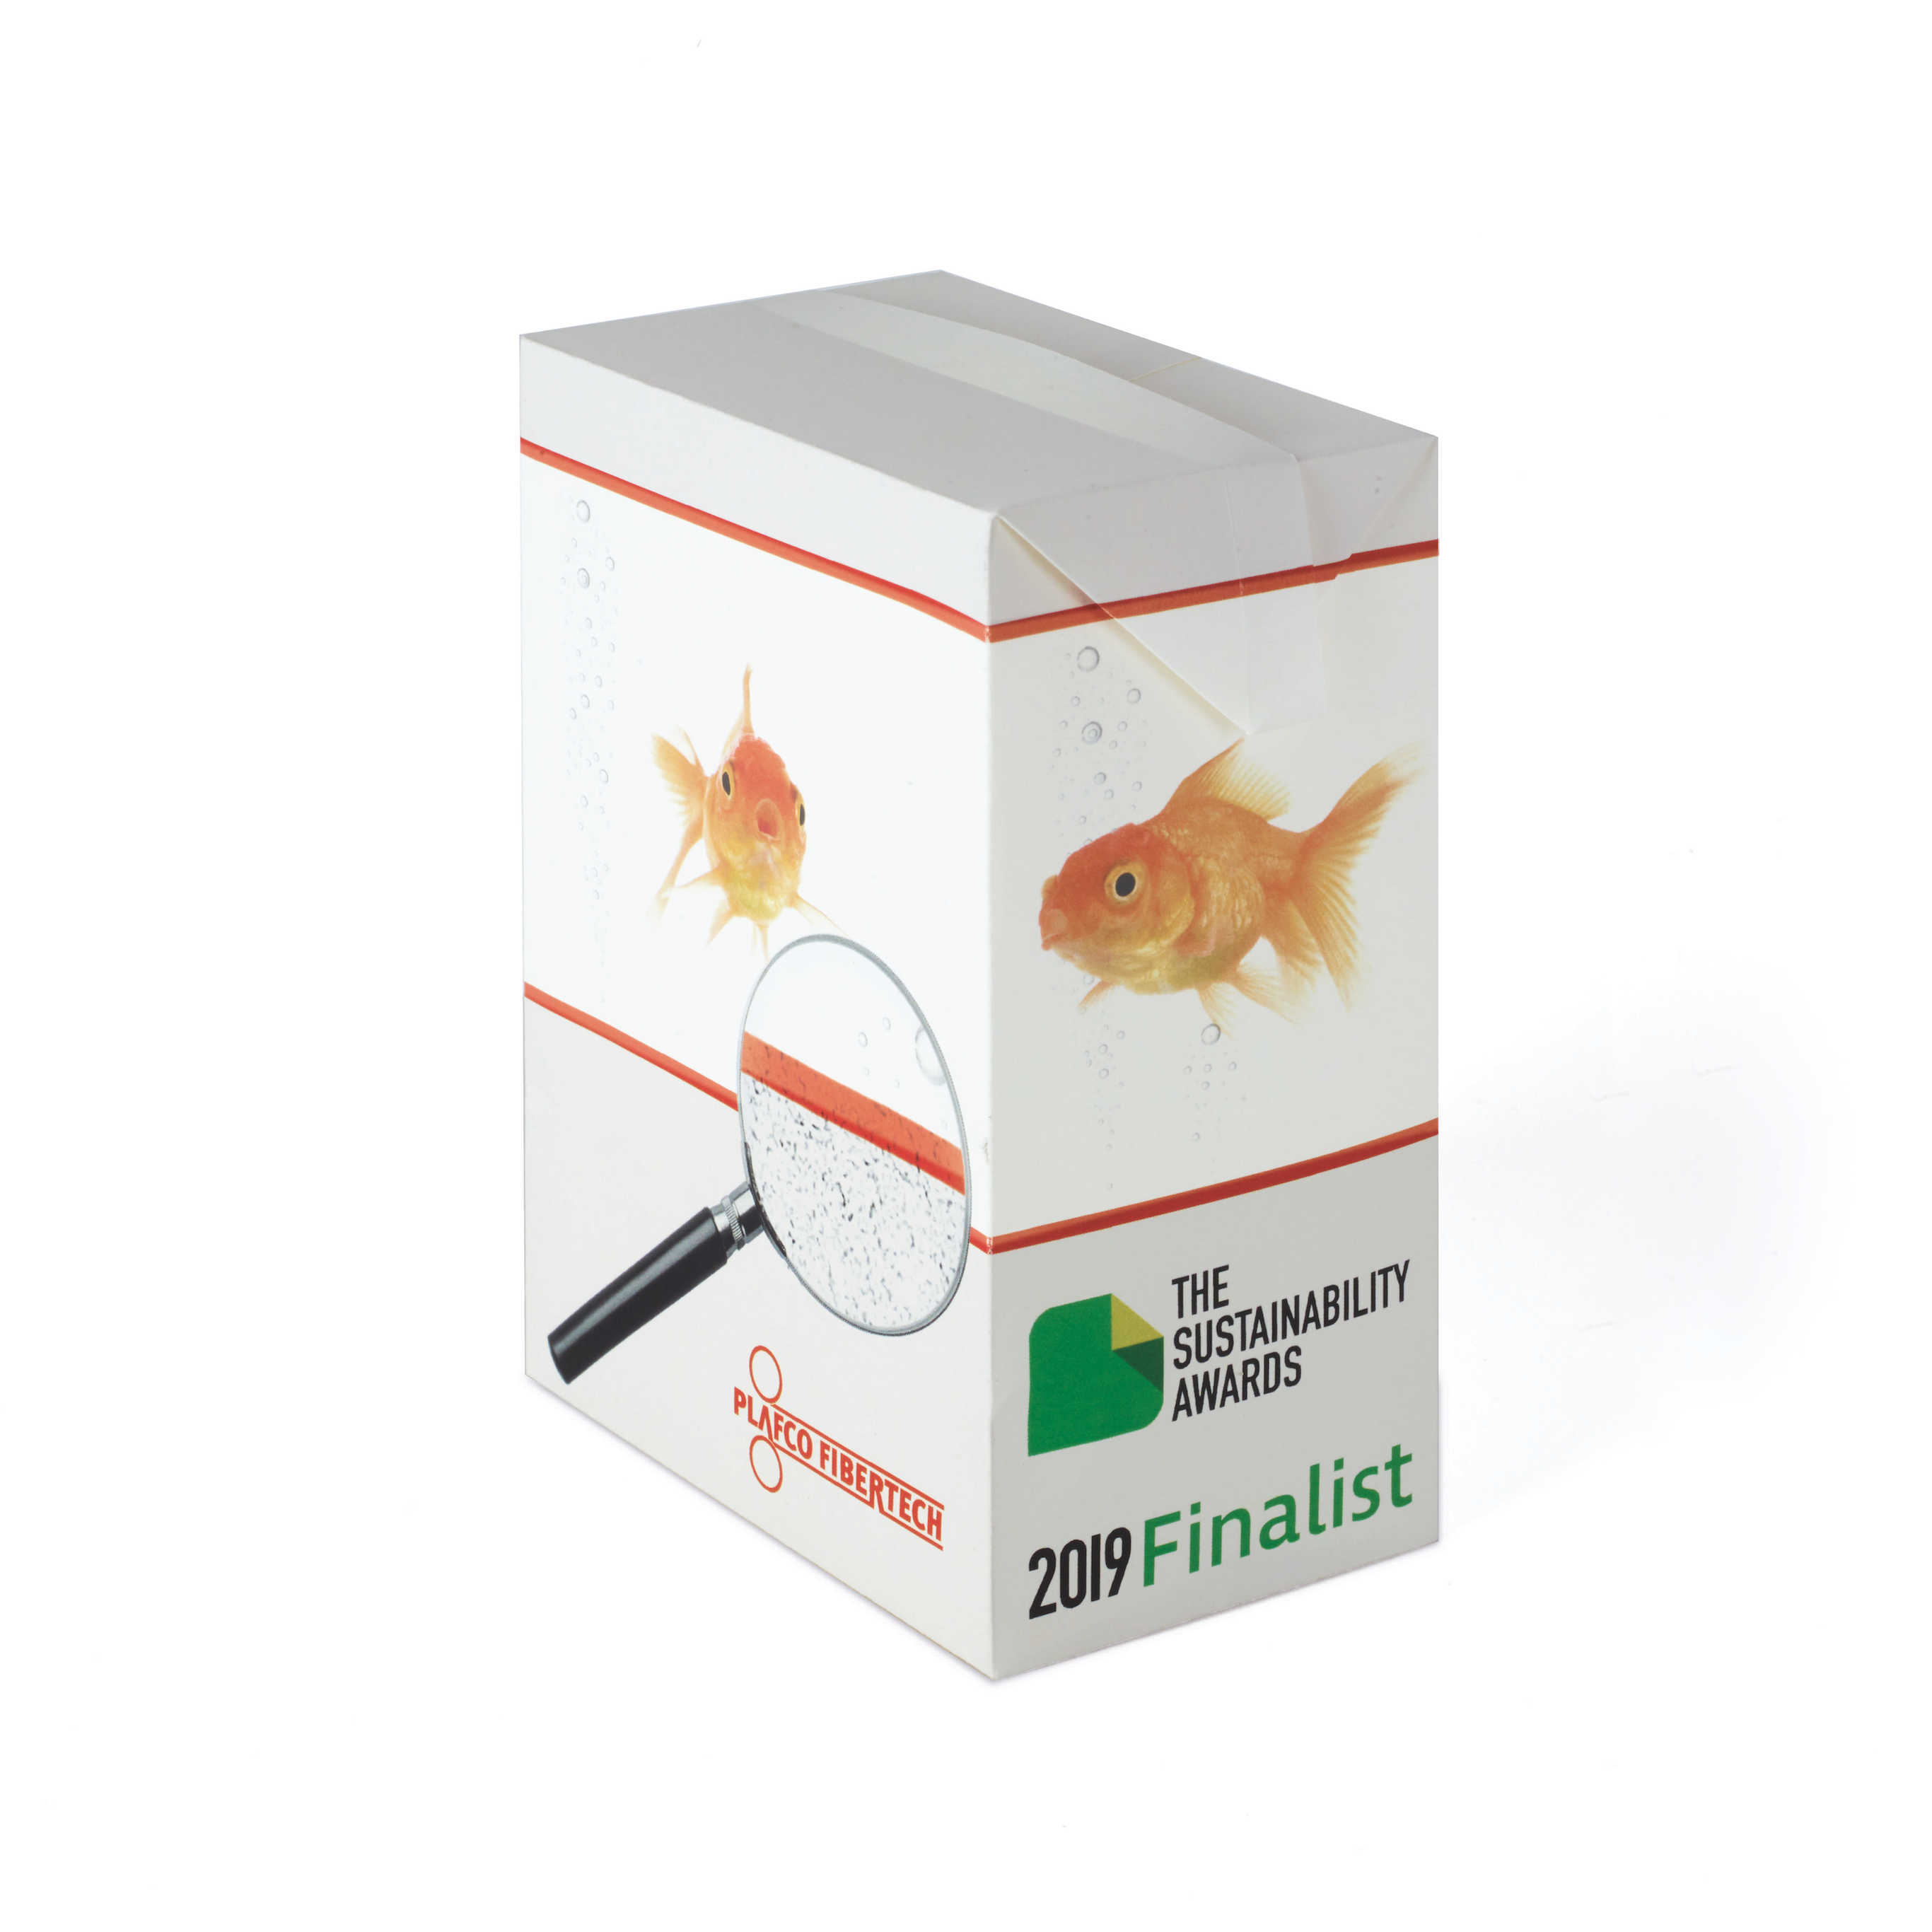 A colourful carton box with the PLAFCO logo and two large goldfish photos.